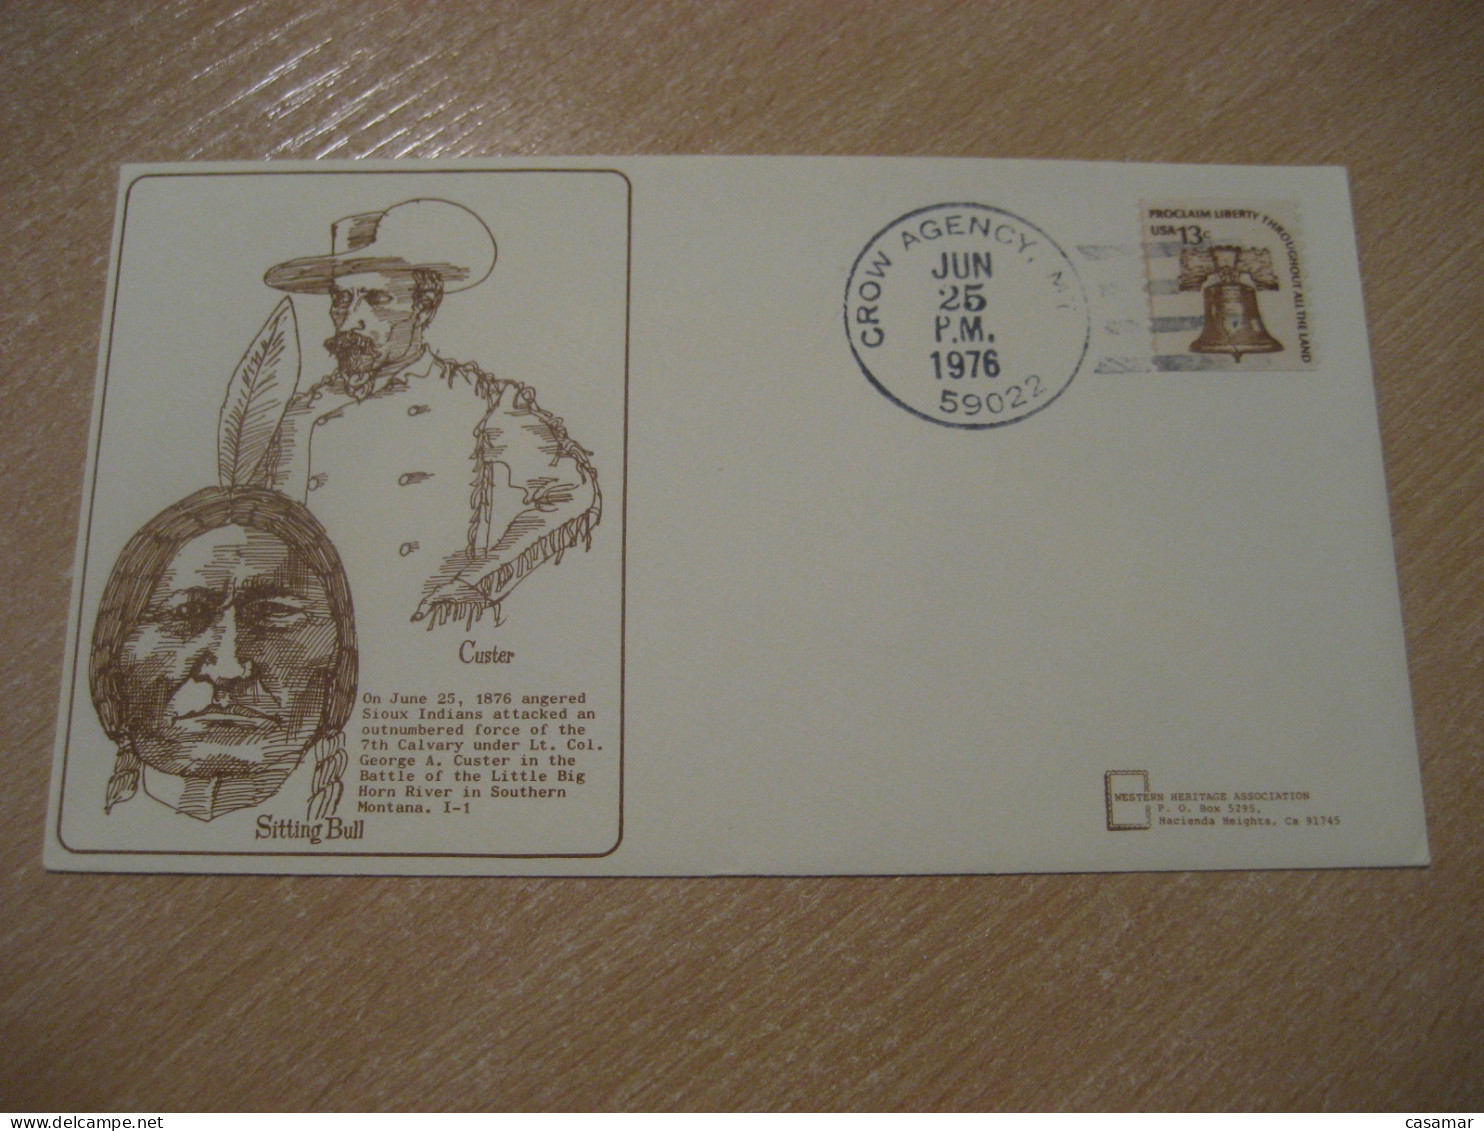 CROW AGENCY 1976 Custer Sitting Bull American Indians Indian Cancel Cover USA Indigenous Native History - Indianen